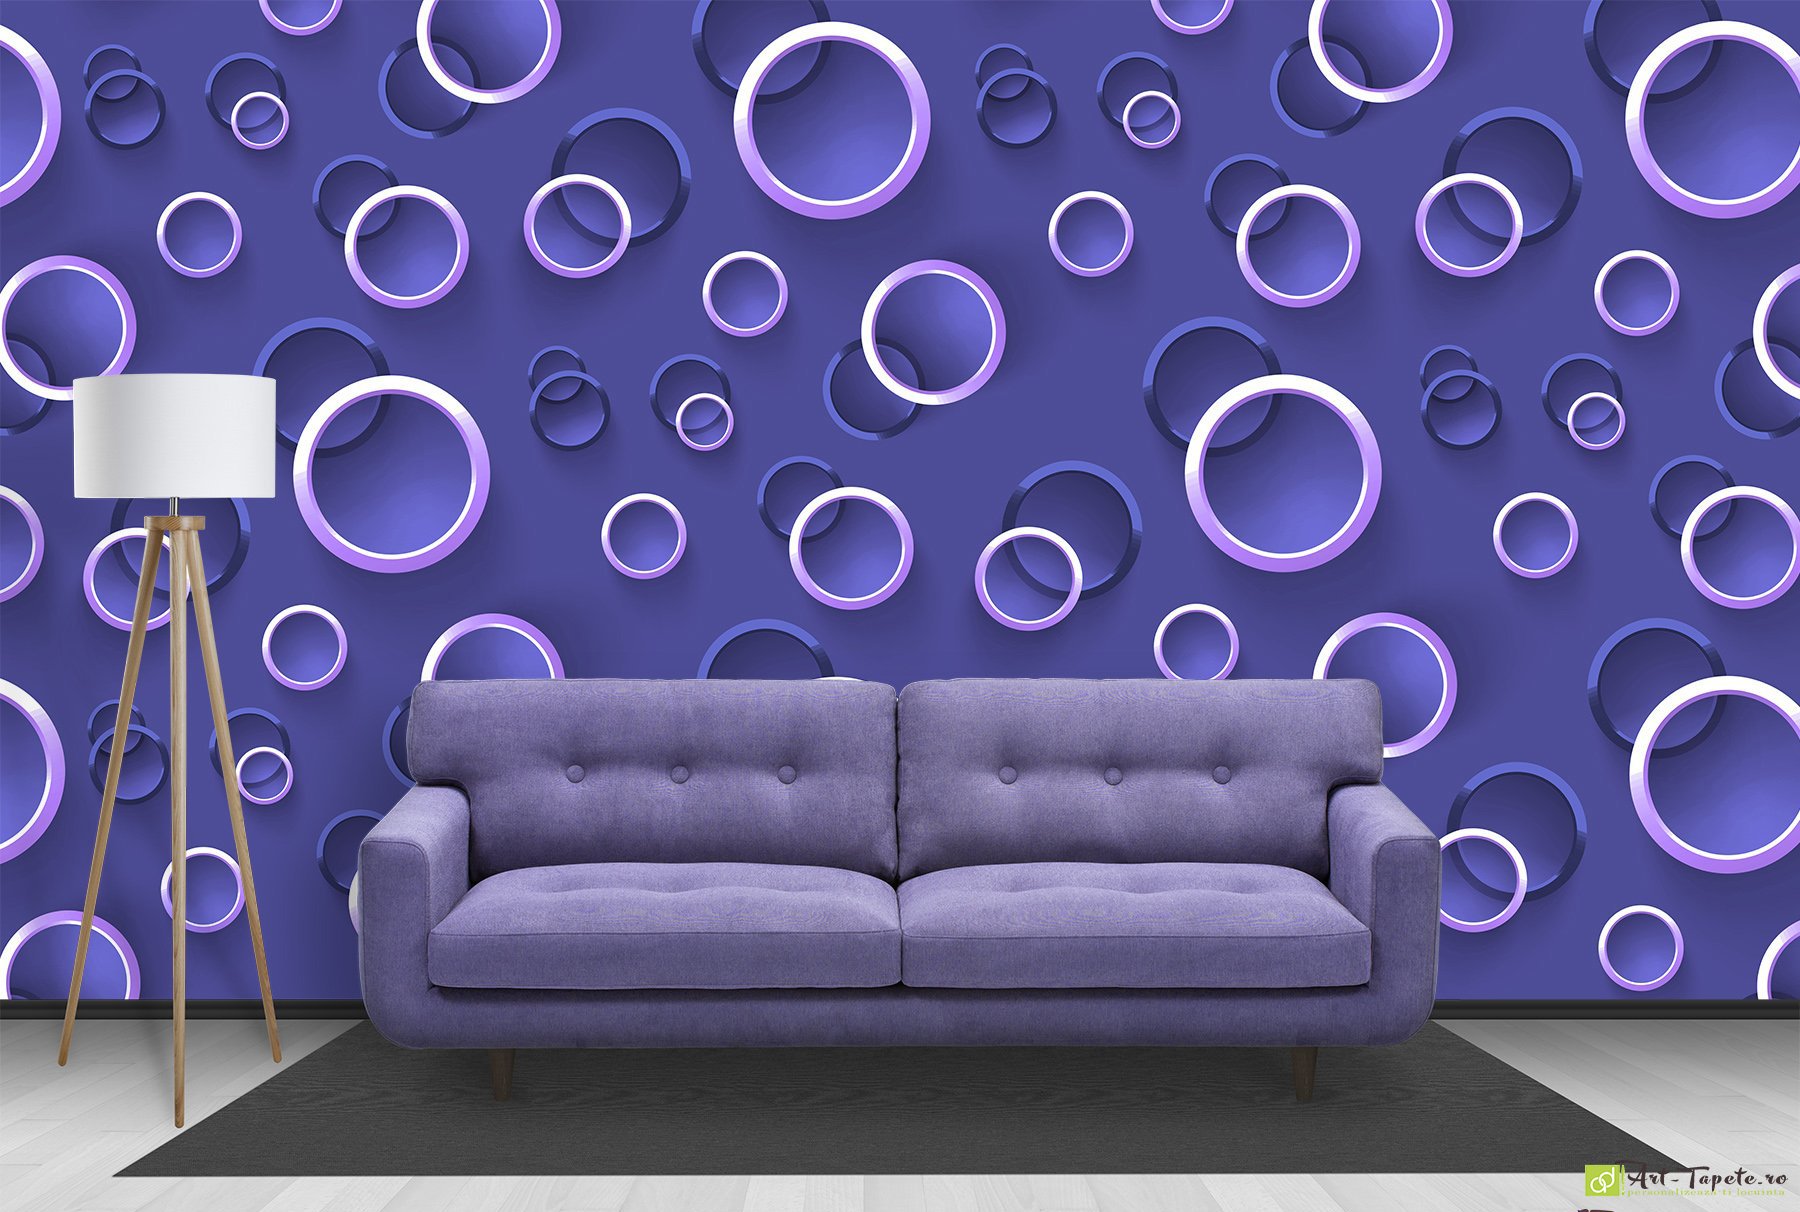 Photo Wallpaper 3D Effect - Circles with lilac background   Online Buy Wholesale 3d wallpaper walls